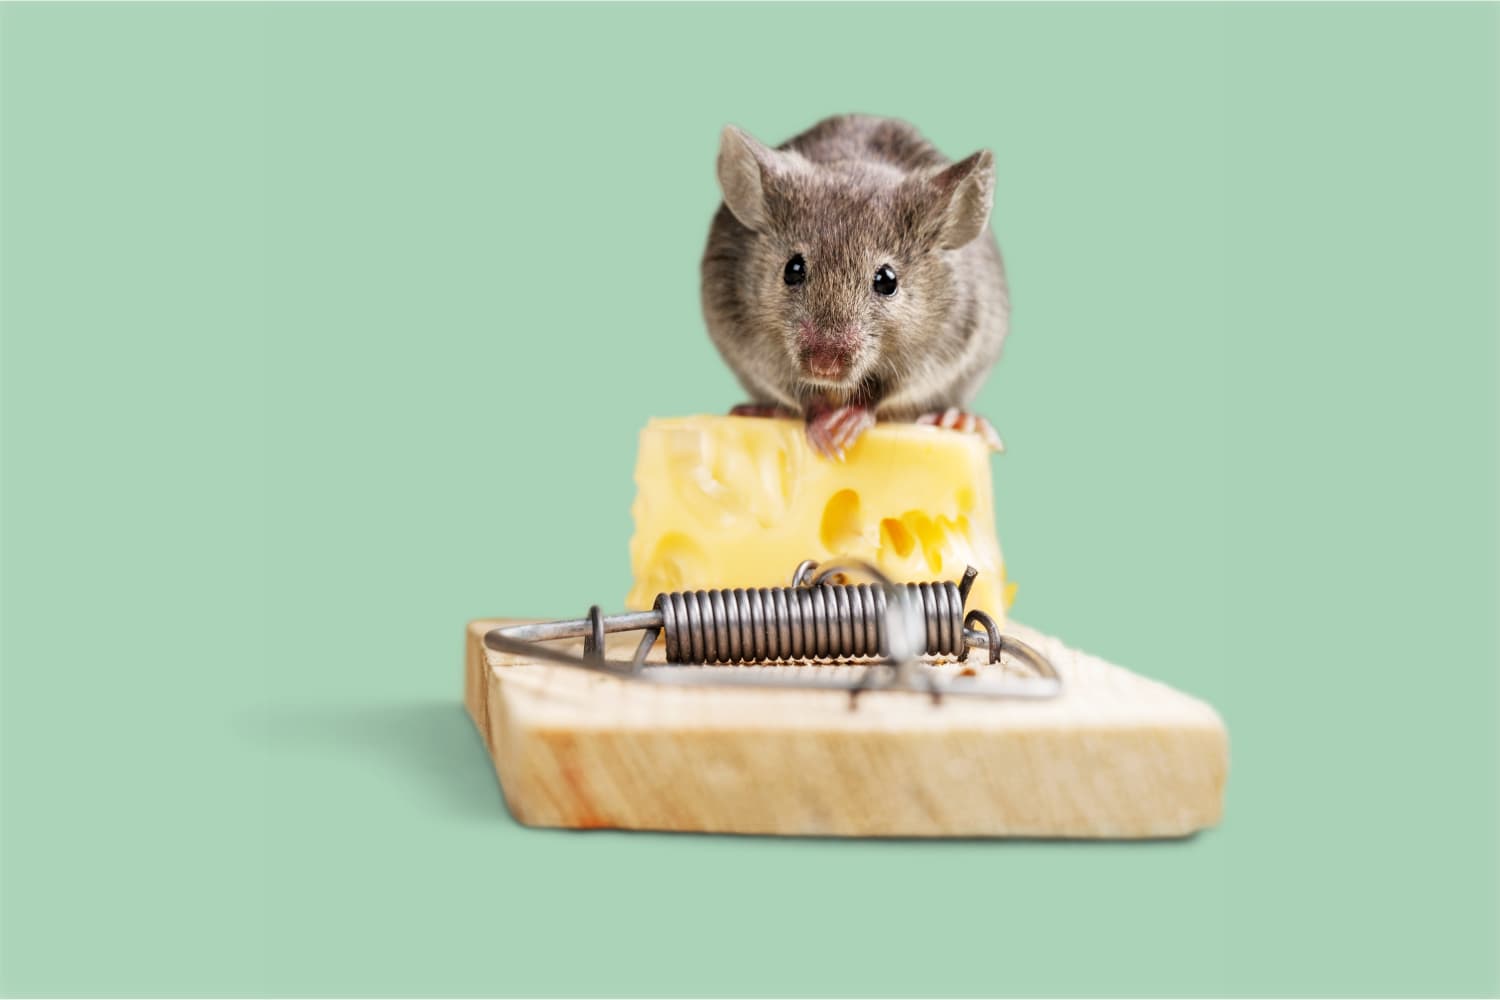 Why You'll Never See Cheese in Our Mouse Traps